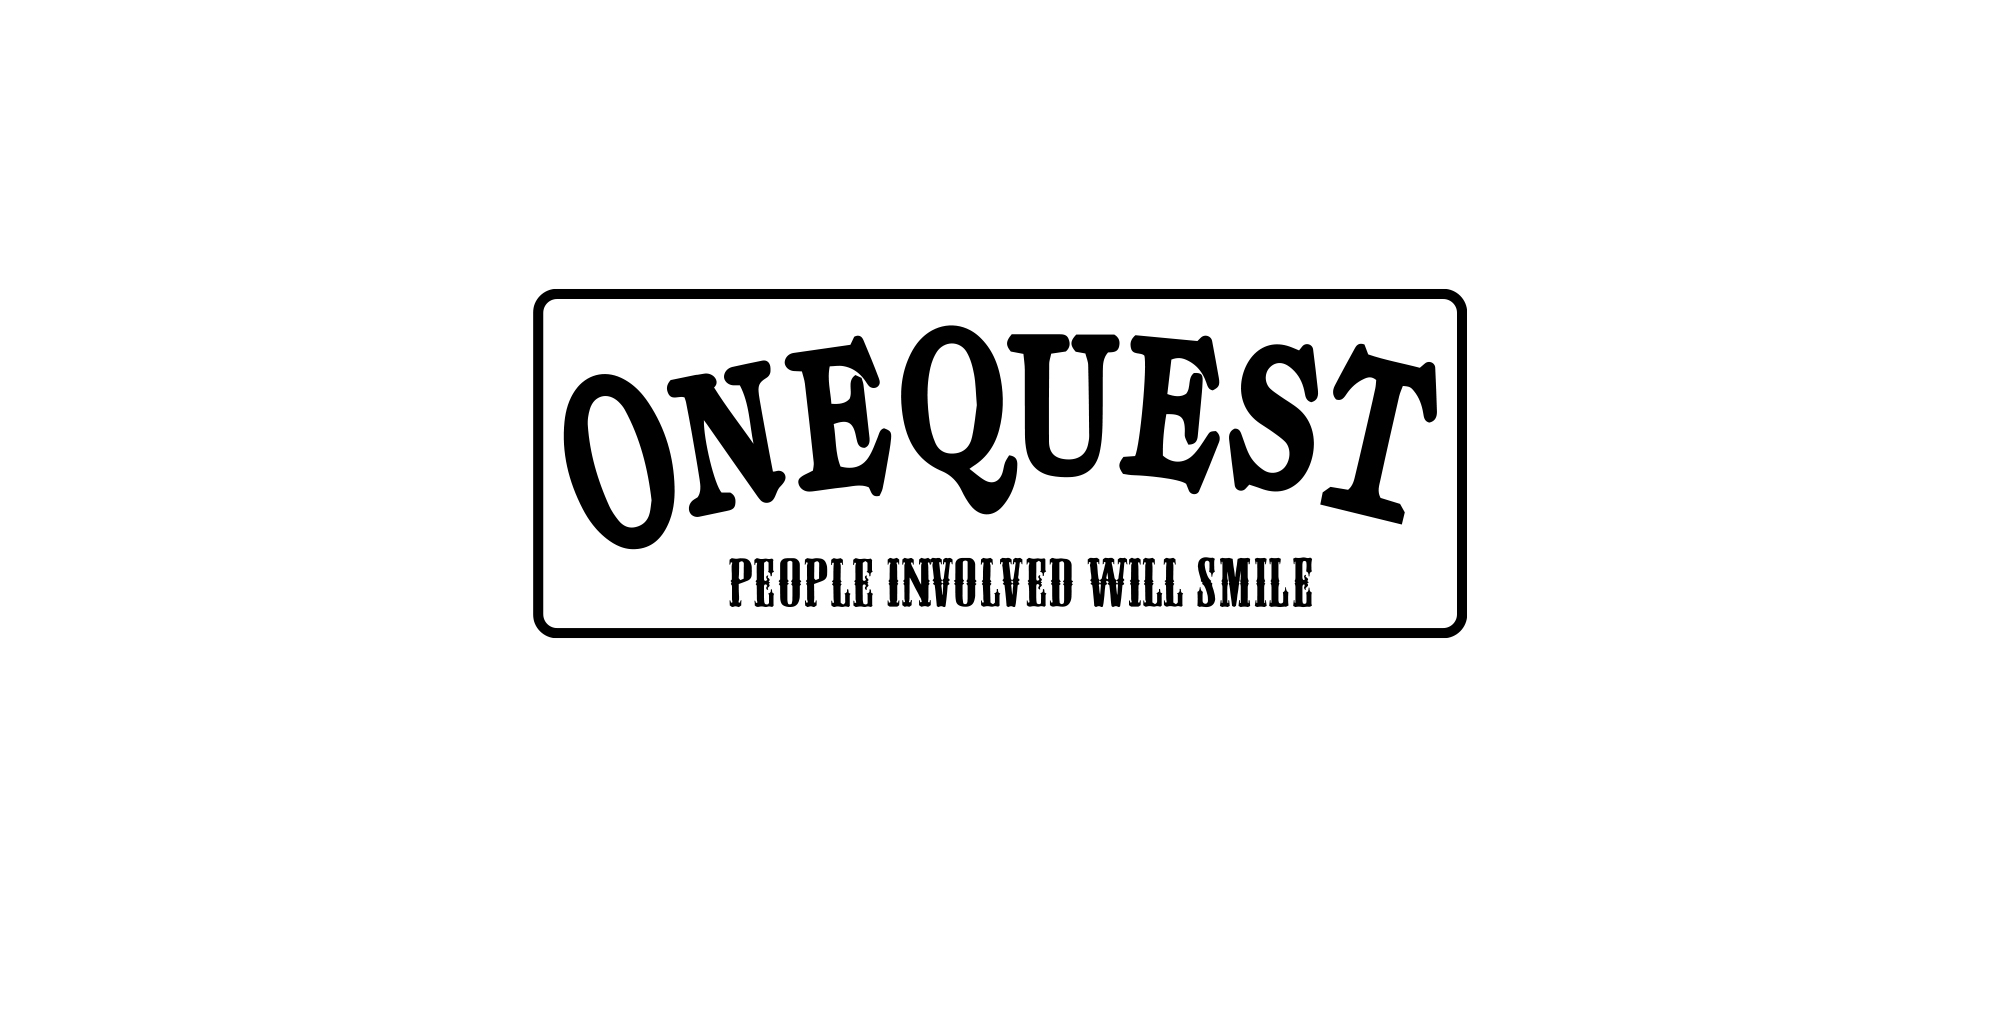 ONEQUEST PEOPLE INVOLVED WILL SMILE　関わる人たちが笑顔になるように